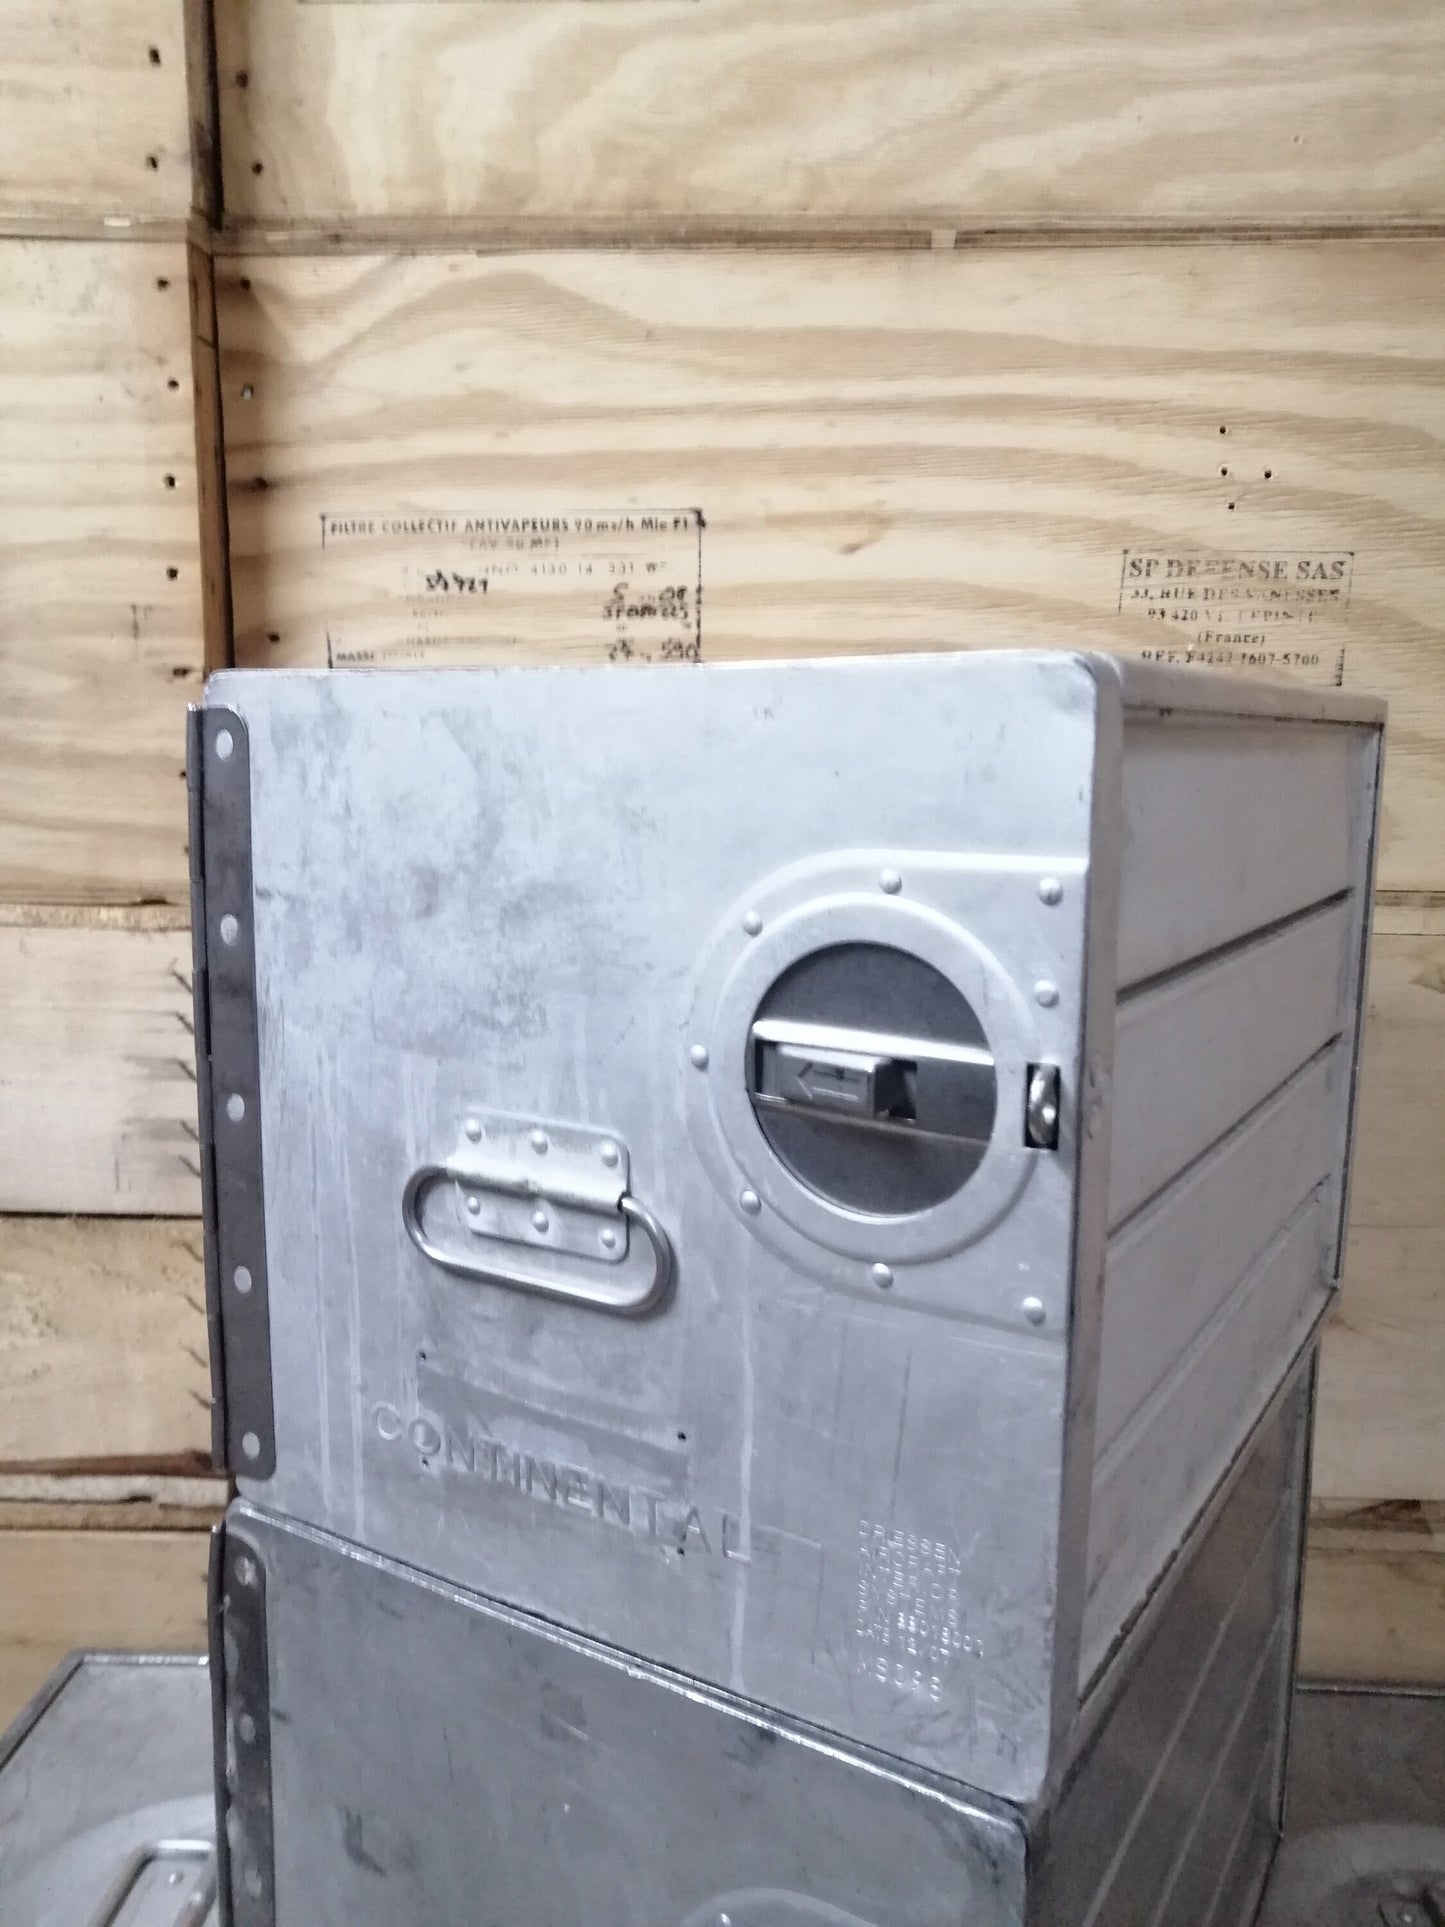 Continental Airlines, Original Airline Galley Box, Aircraft Storage Container, Industrial Cabinet